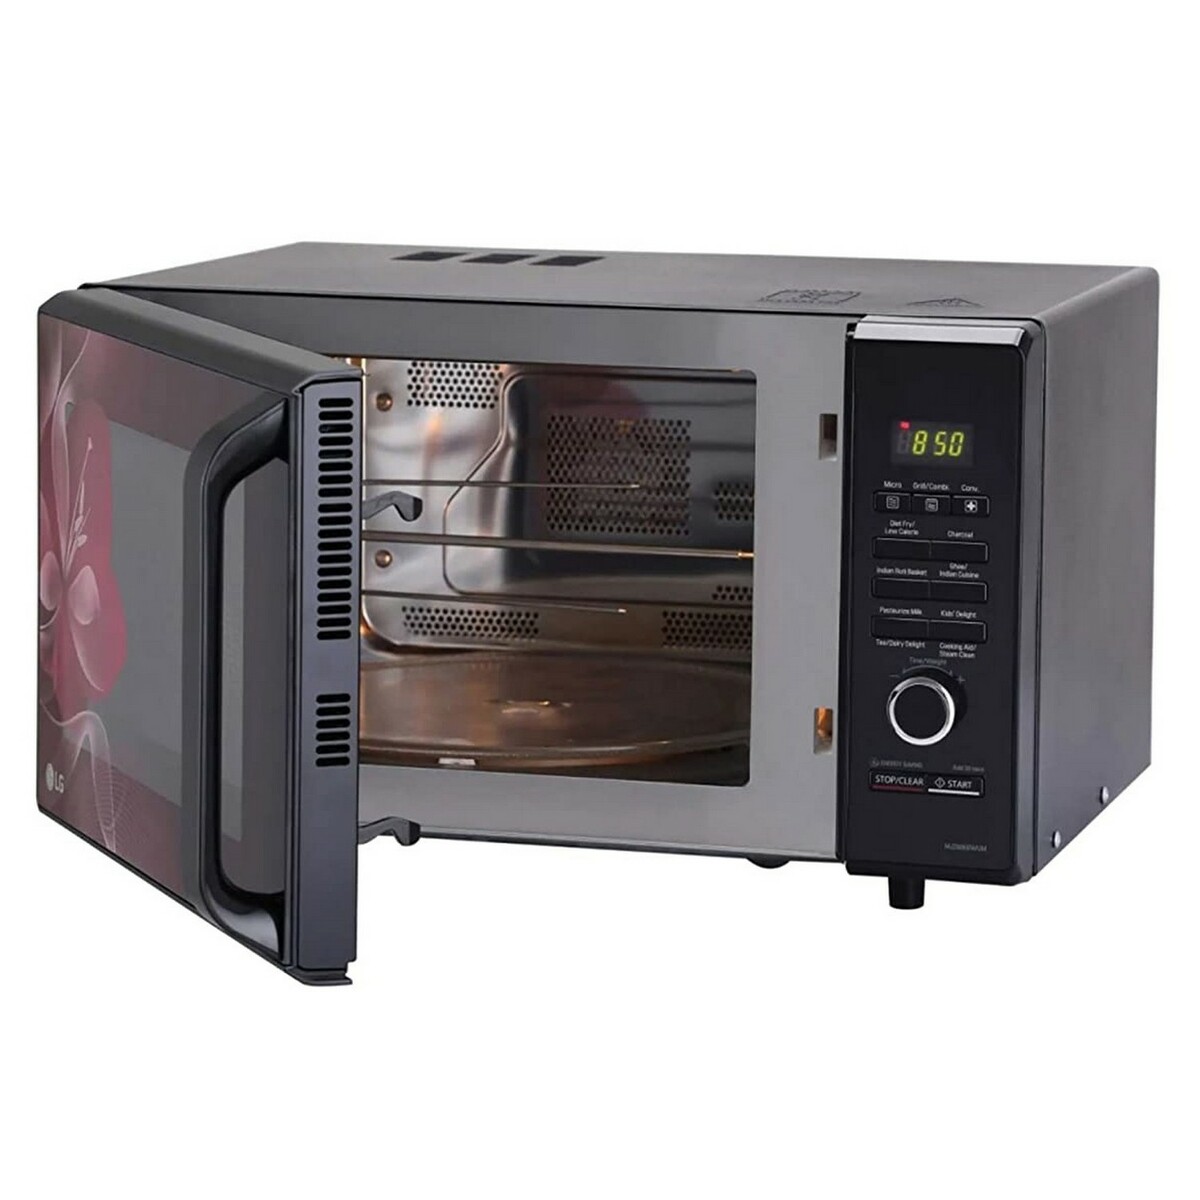 LG Microwave Oven All In One MJ2886BWUM 28Ltr